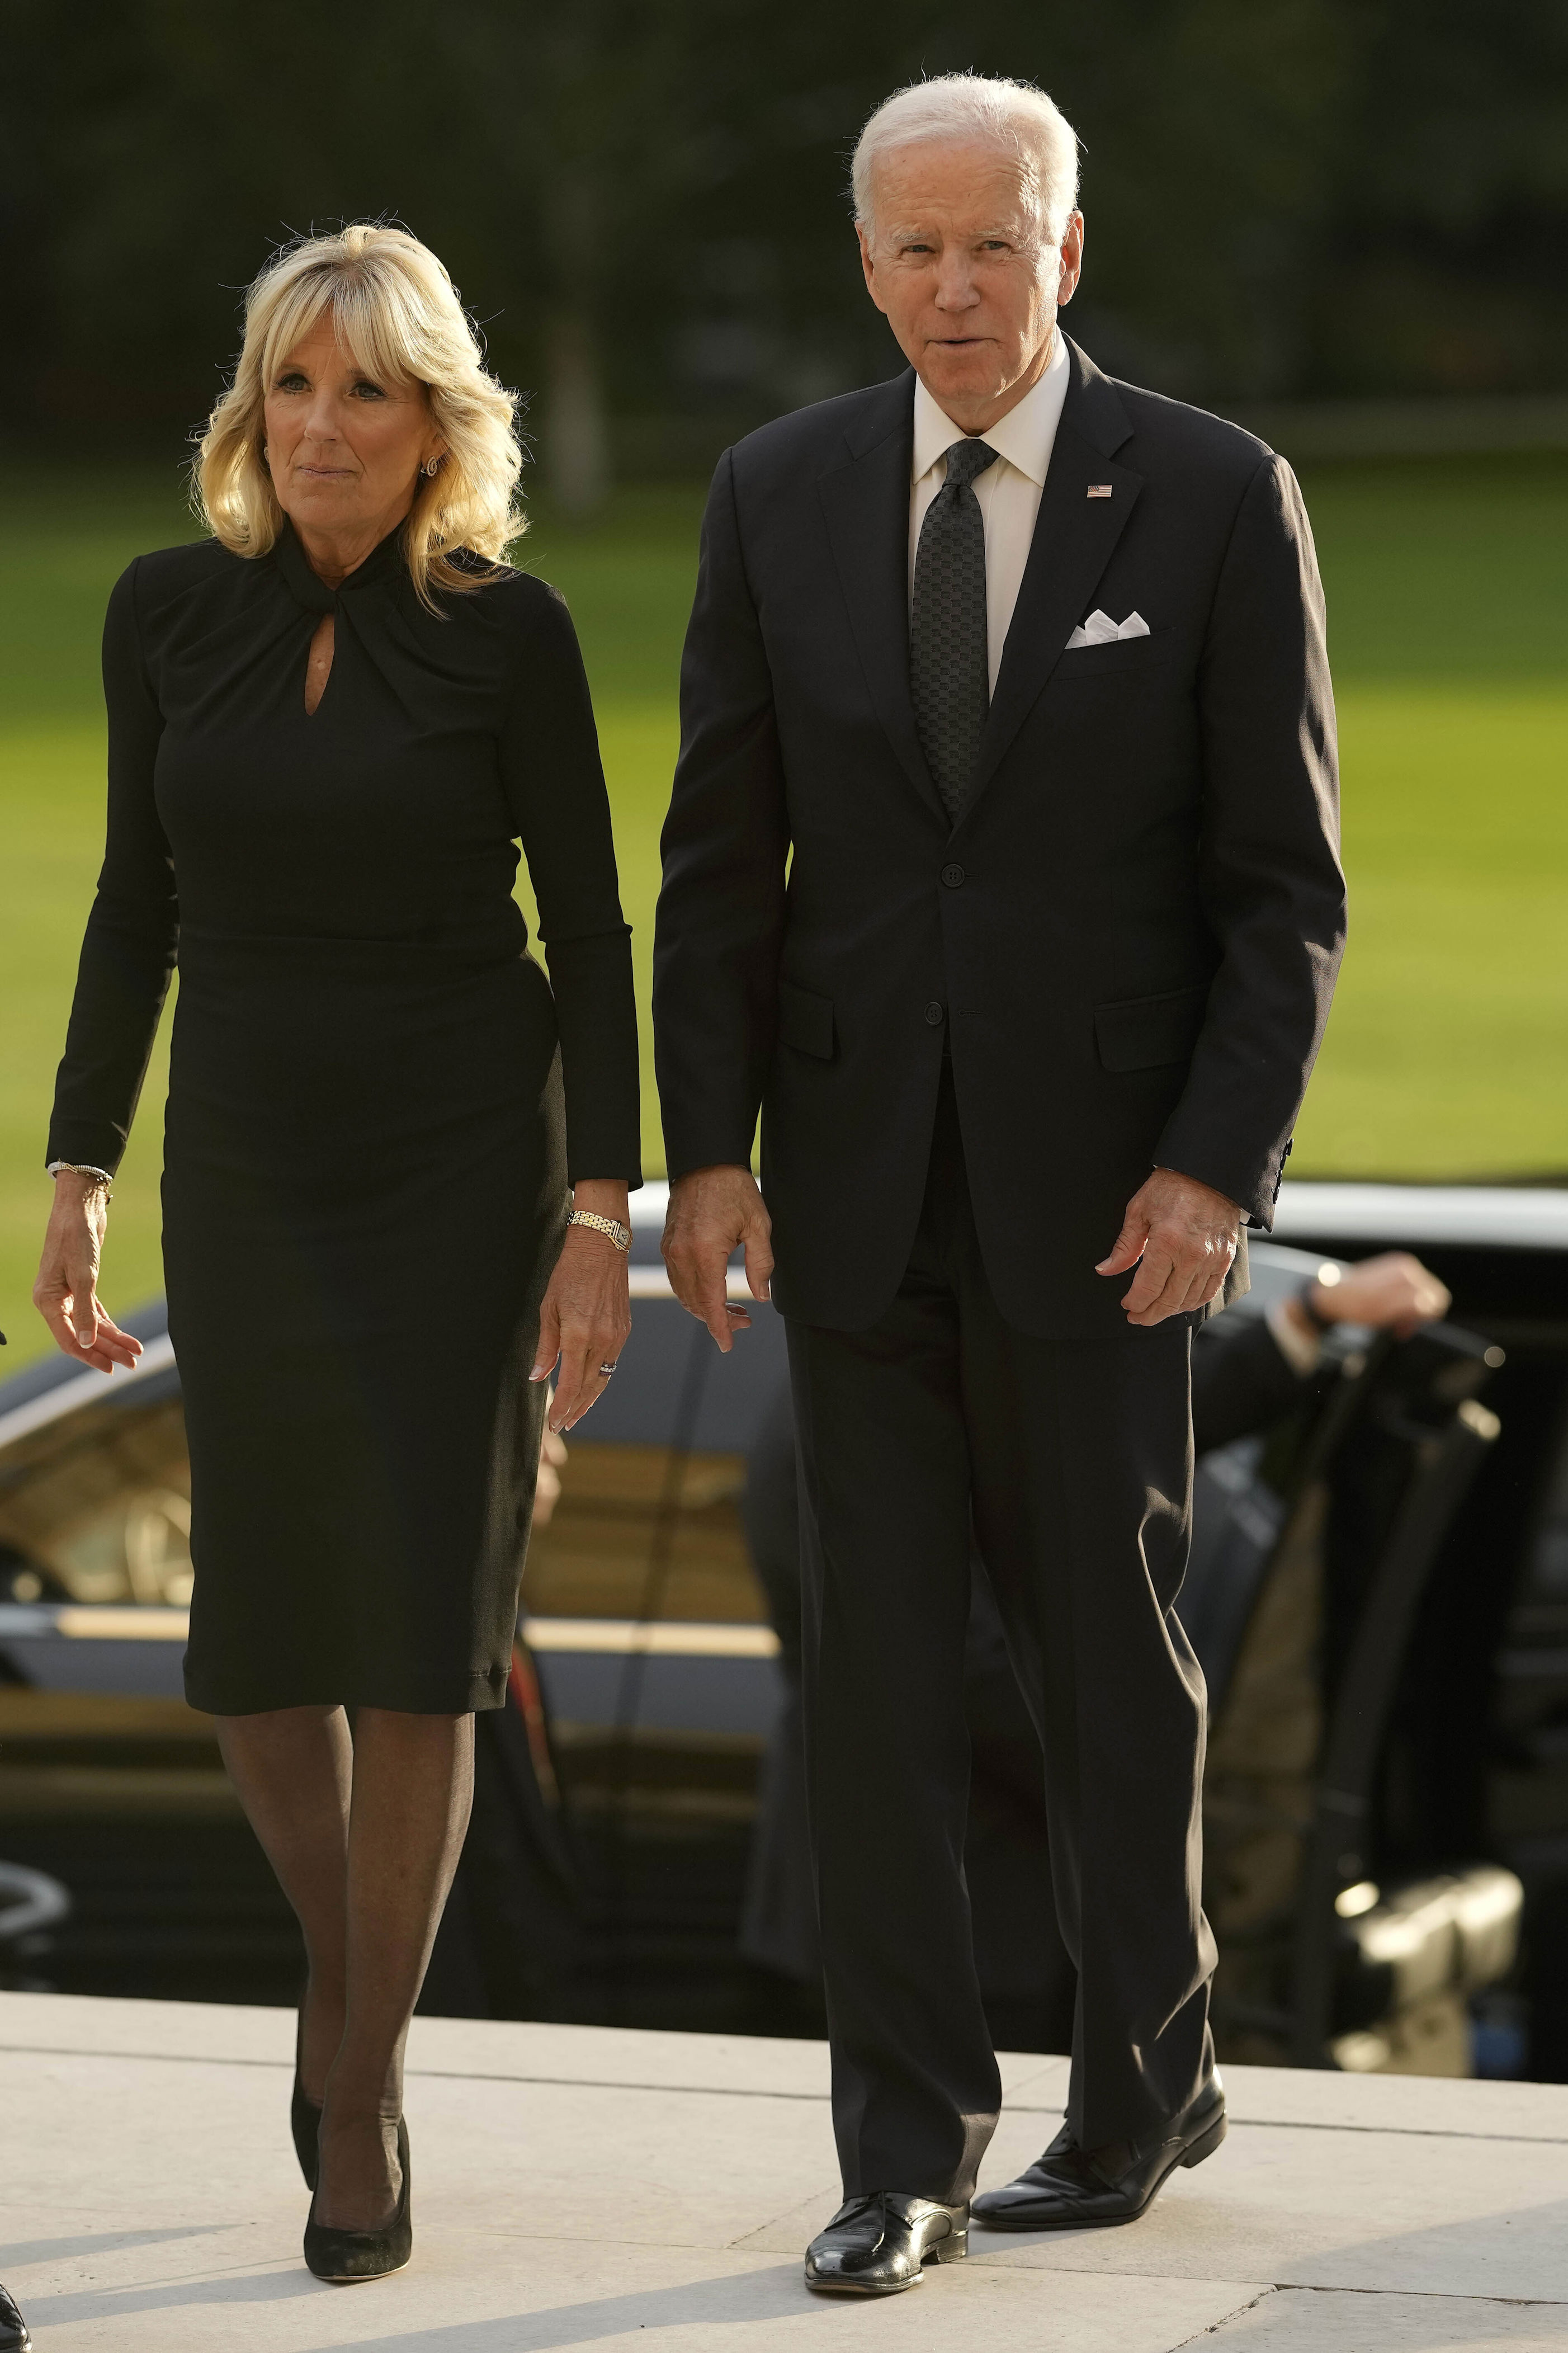 <p>President Joe Biden and first lady Jill Biden arrived at Buckingham Palace in London on Sept. 18, 2022, to attend King Charles III's reception for heads of state and other world leaders the night before the state funeral of Queen Elizabeth II.</p>